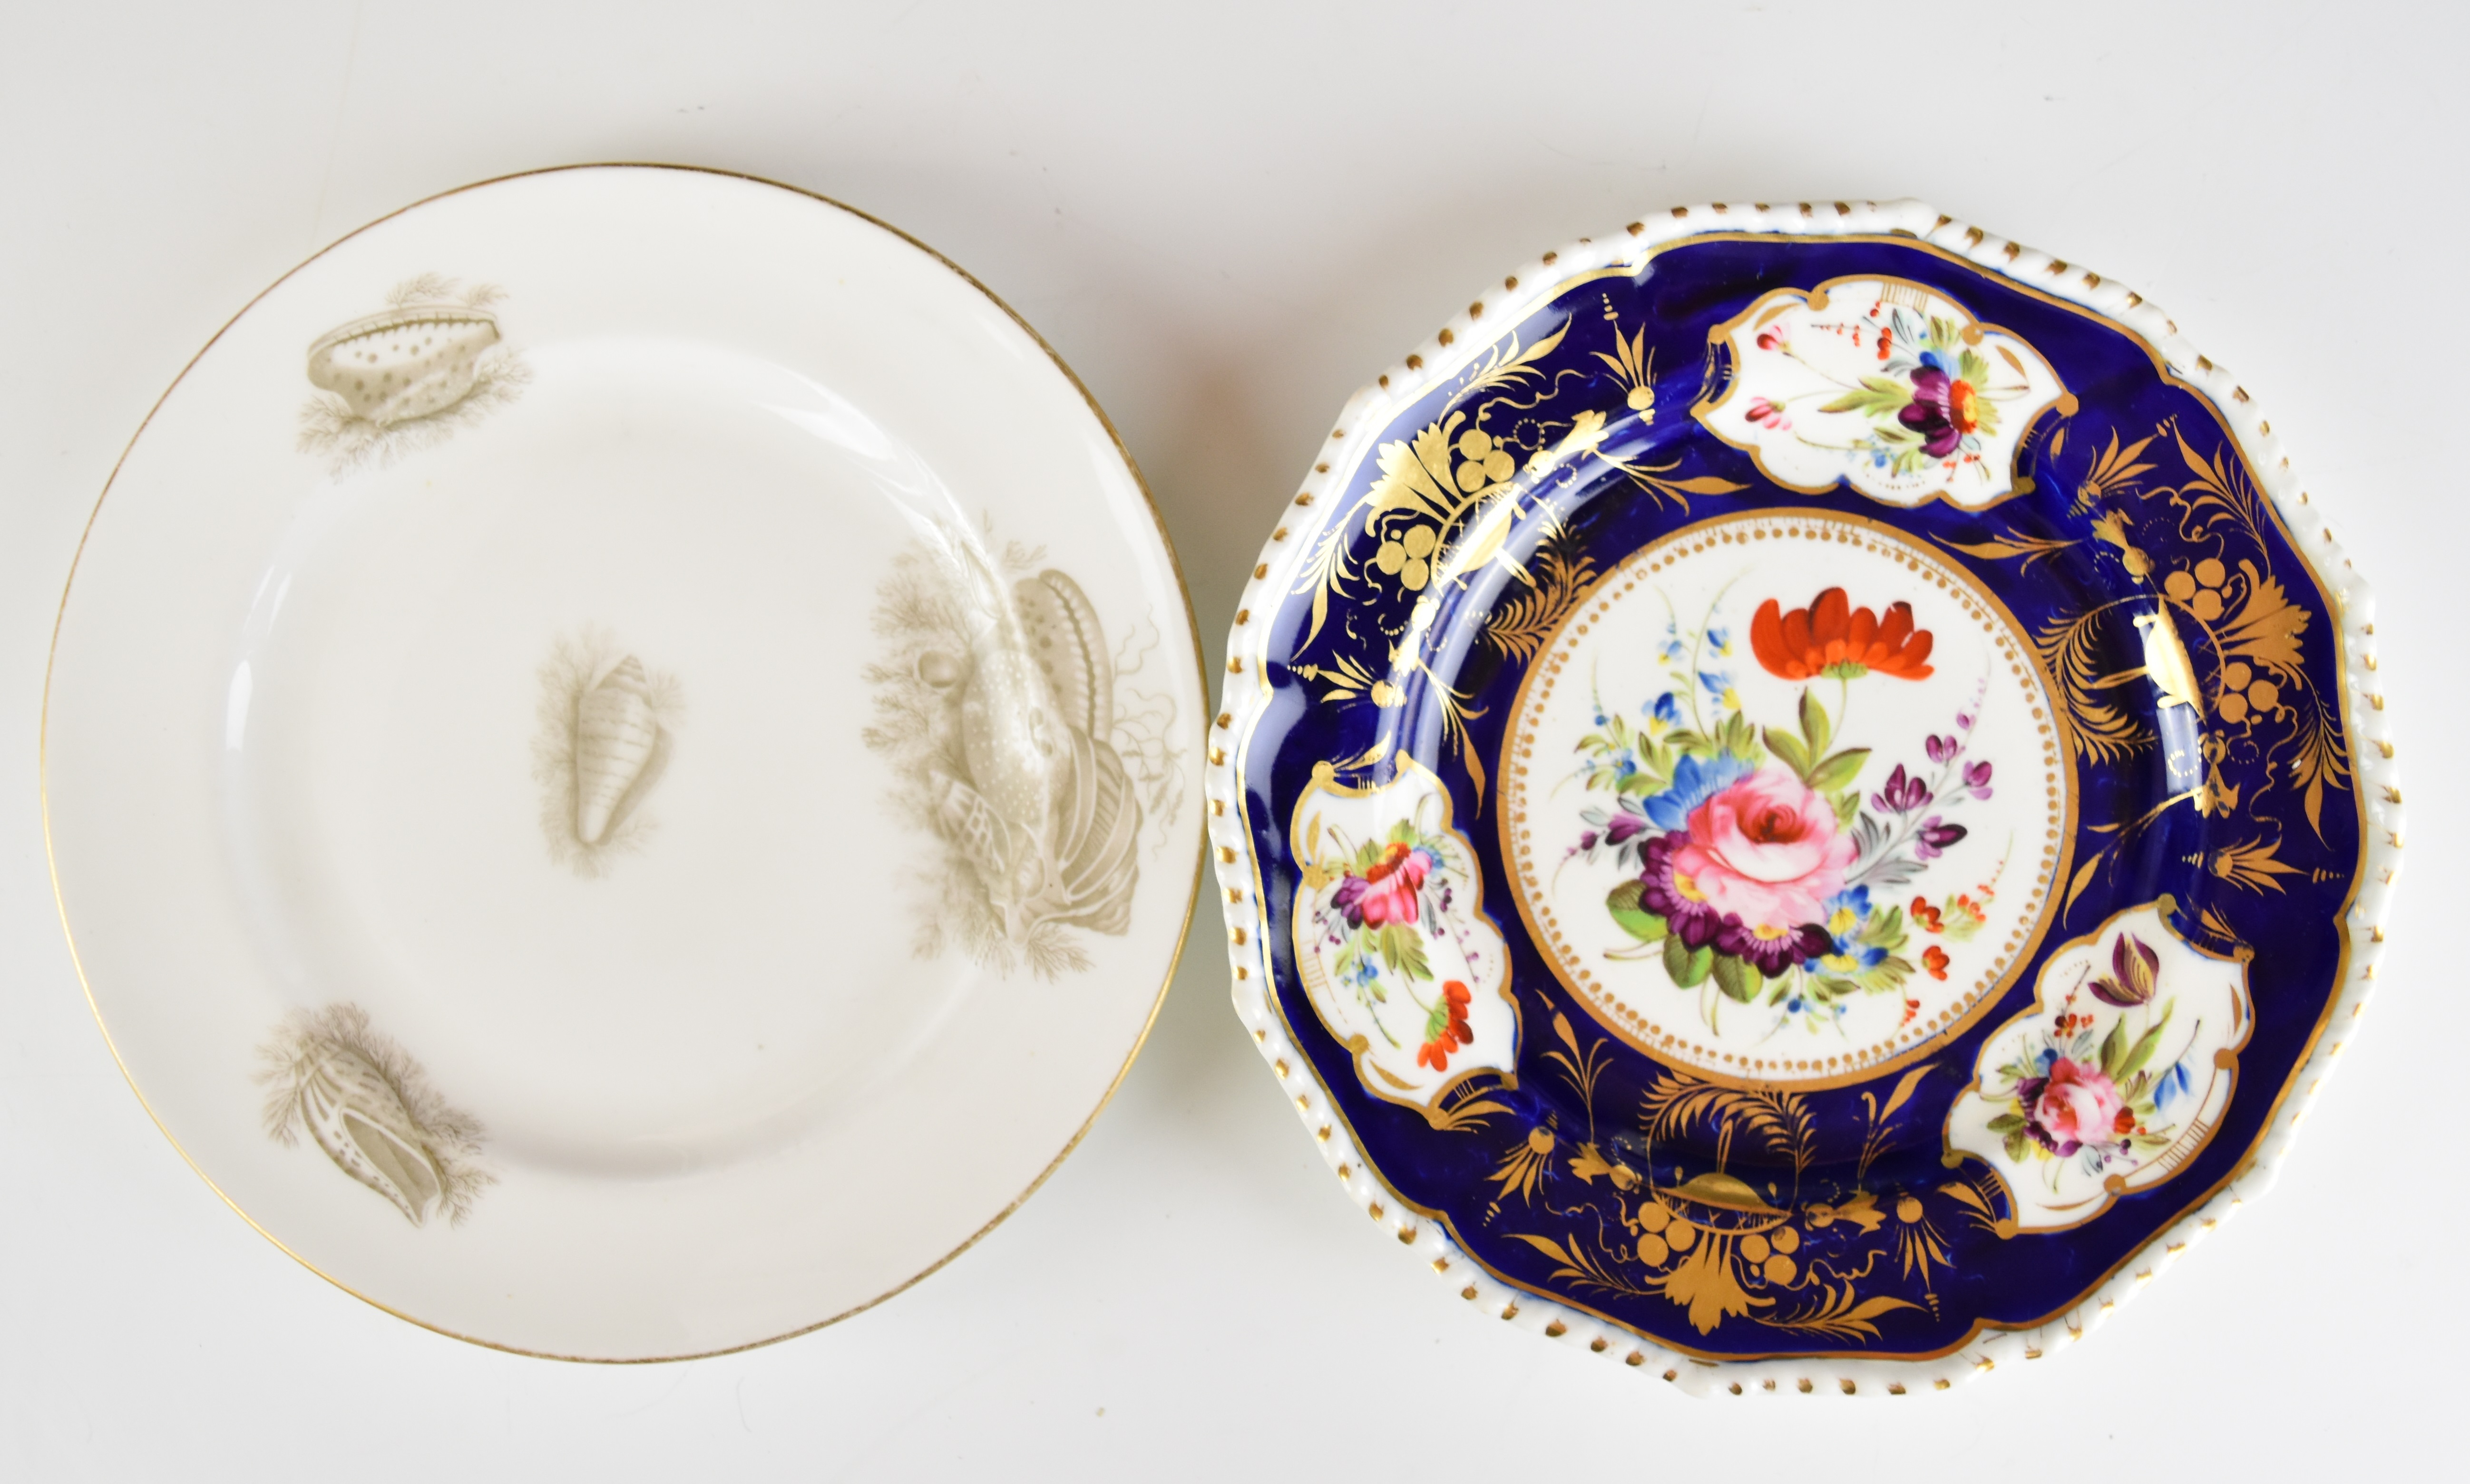 19thC cabinet plates and dishes including Copeland and Garrett, Yates, Flight Barr and Barr plates - Image 8 of 11